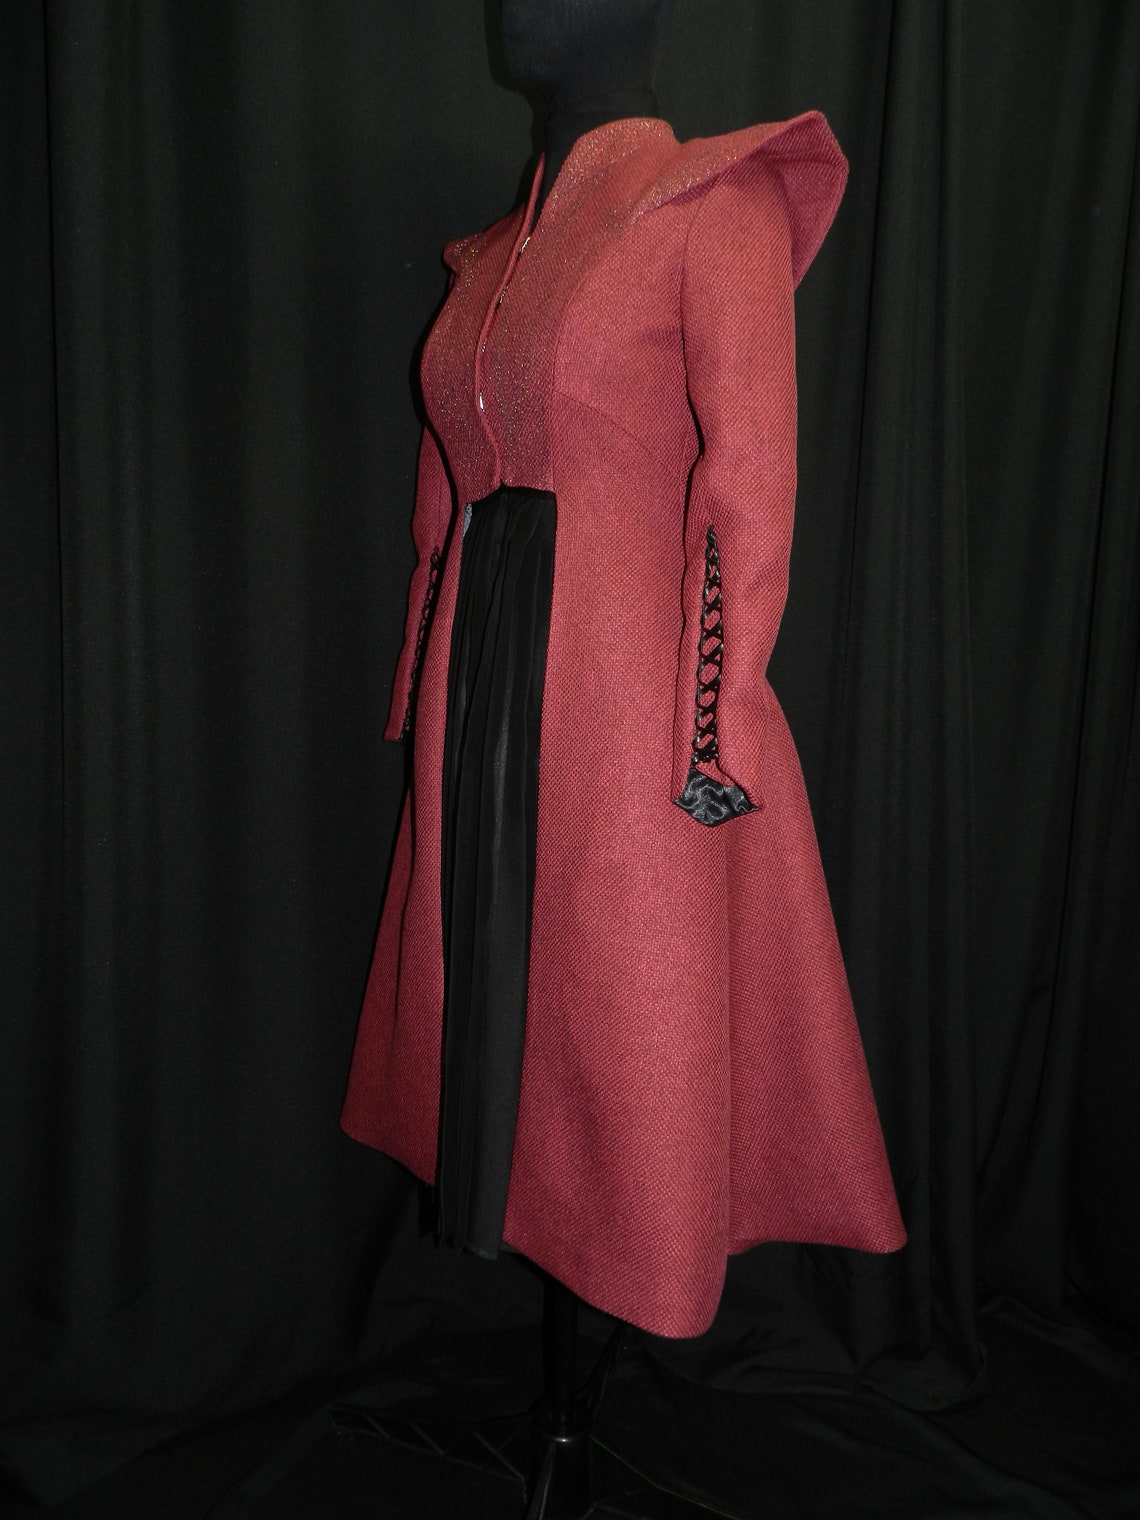 Inspired by Daenerys Wine Red jacket and black pleated skirt | Etsy